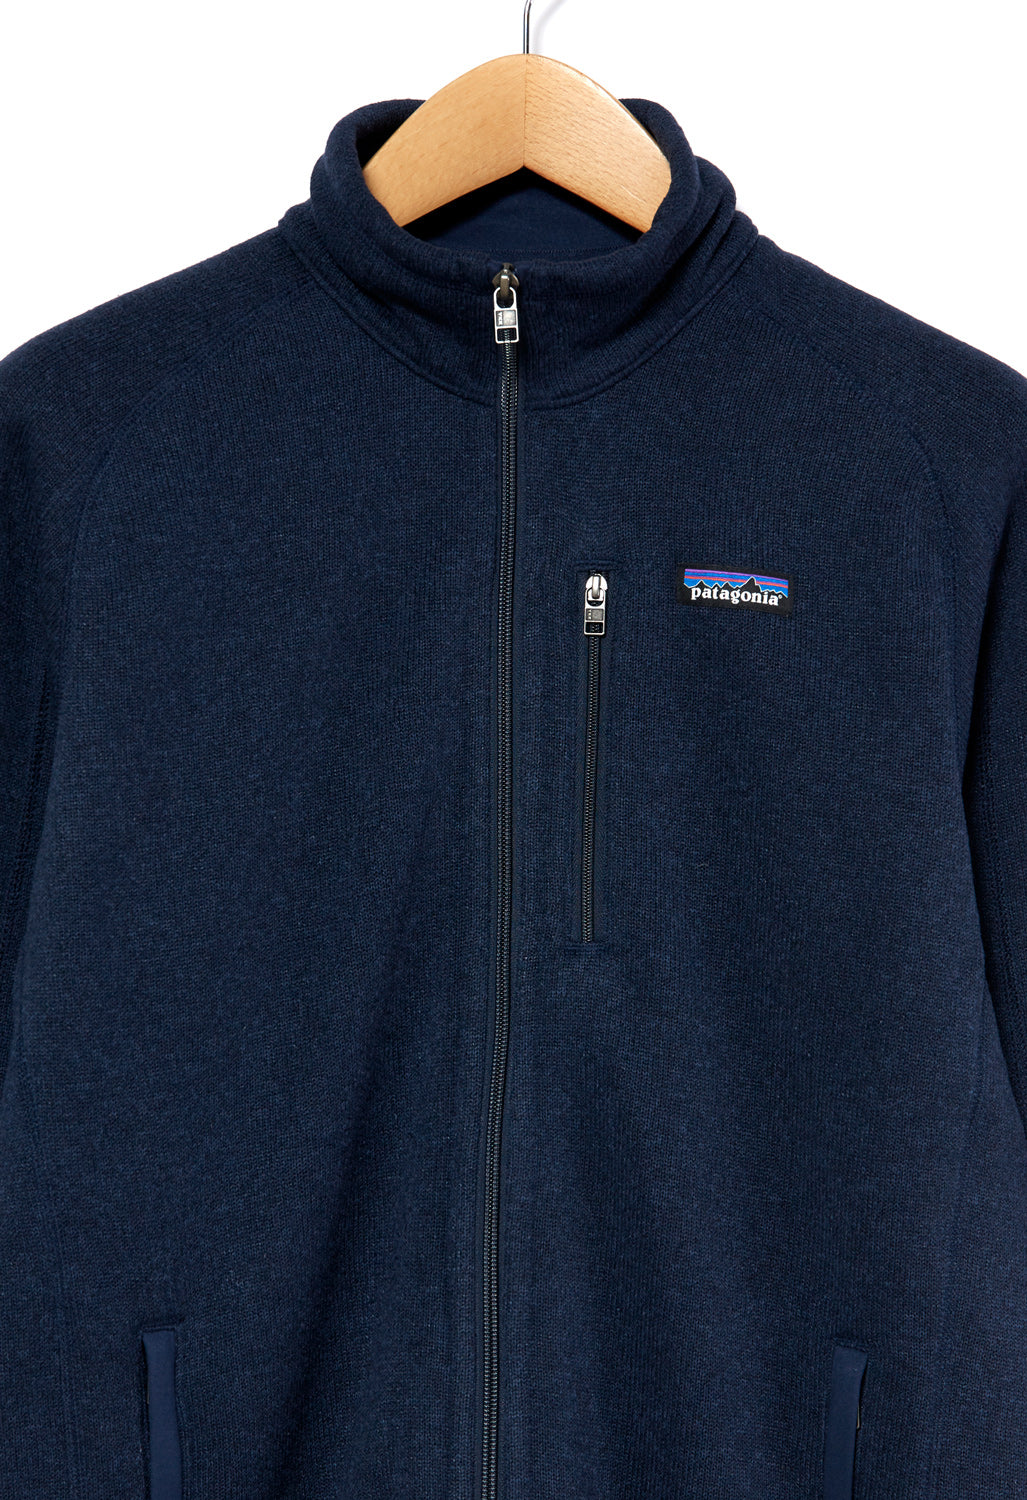 Patagonia Better Sweater Men's Jacket - New Navy